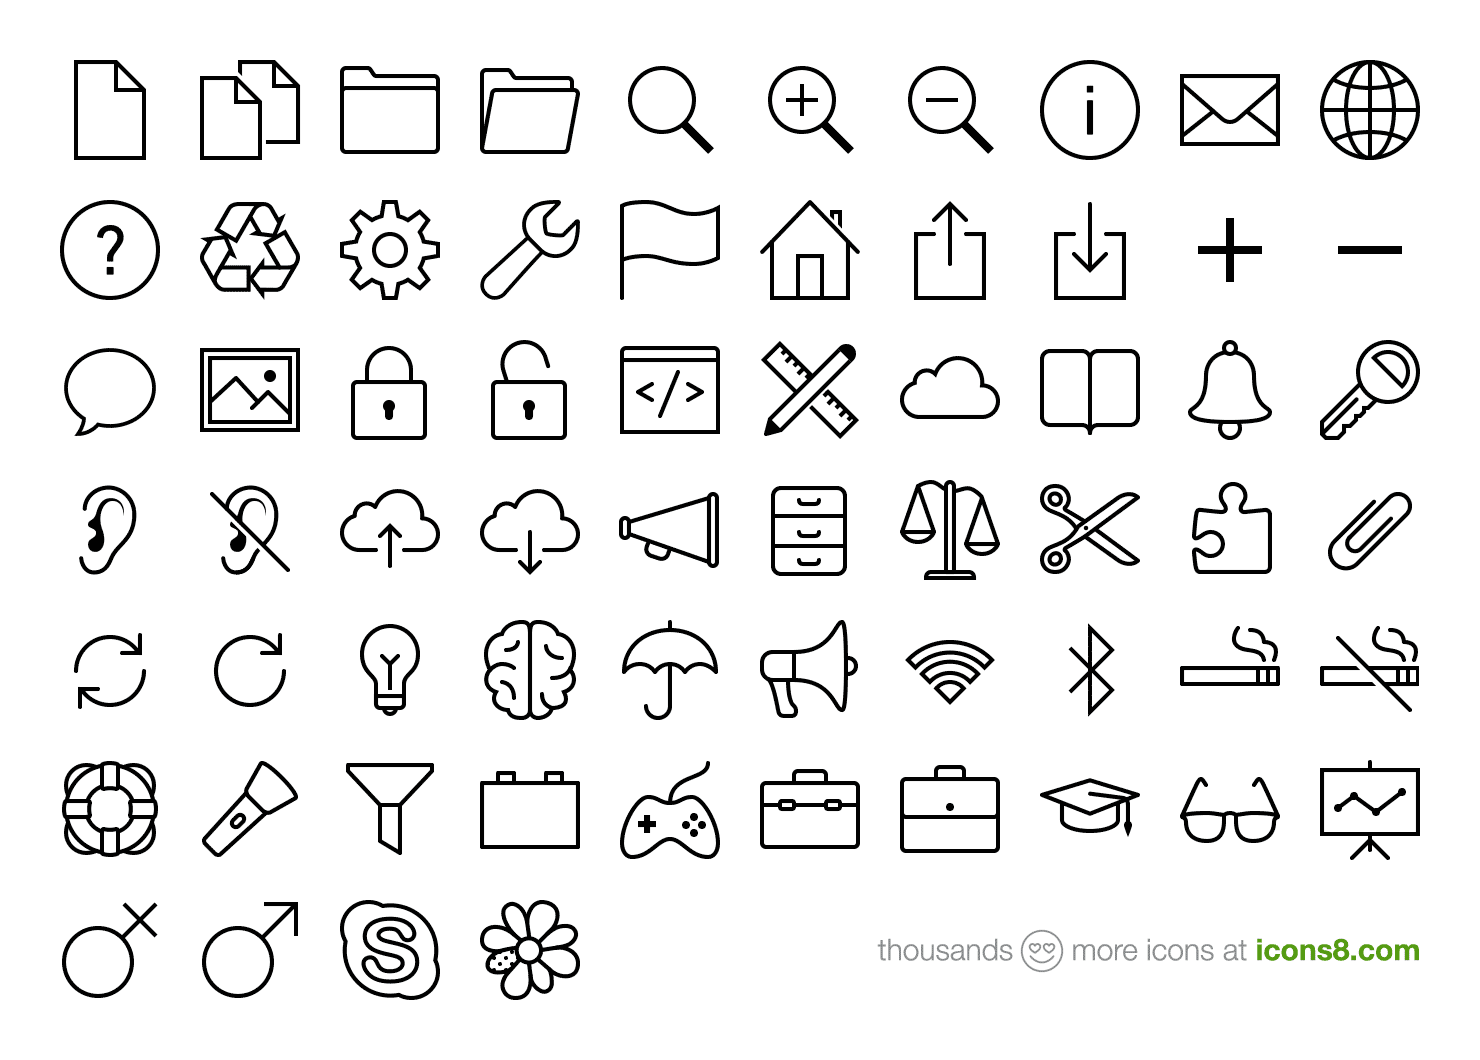 Few sample icons from iOS 7 icons pack